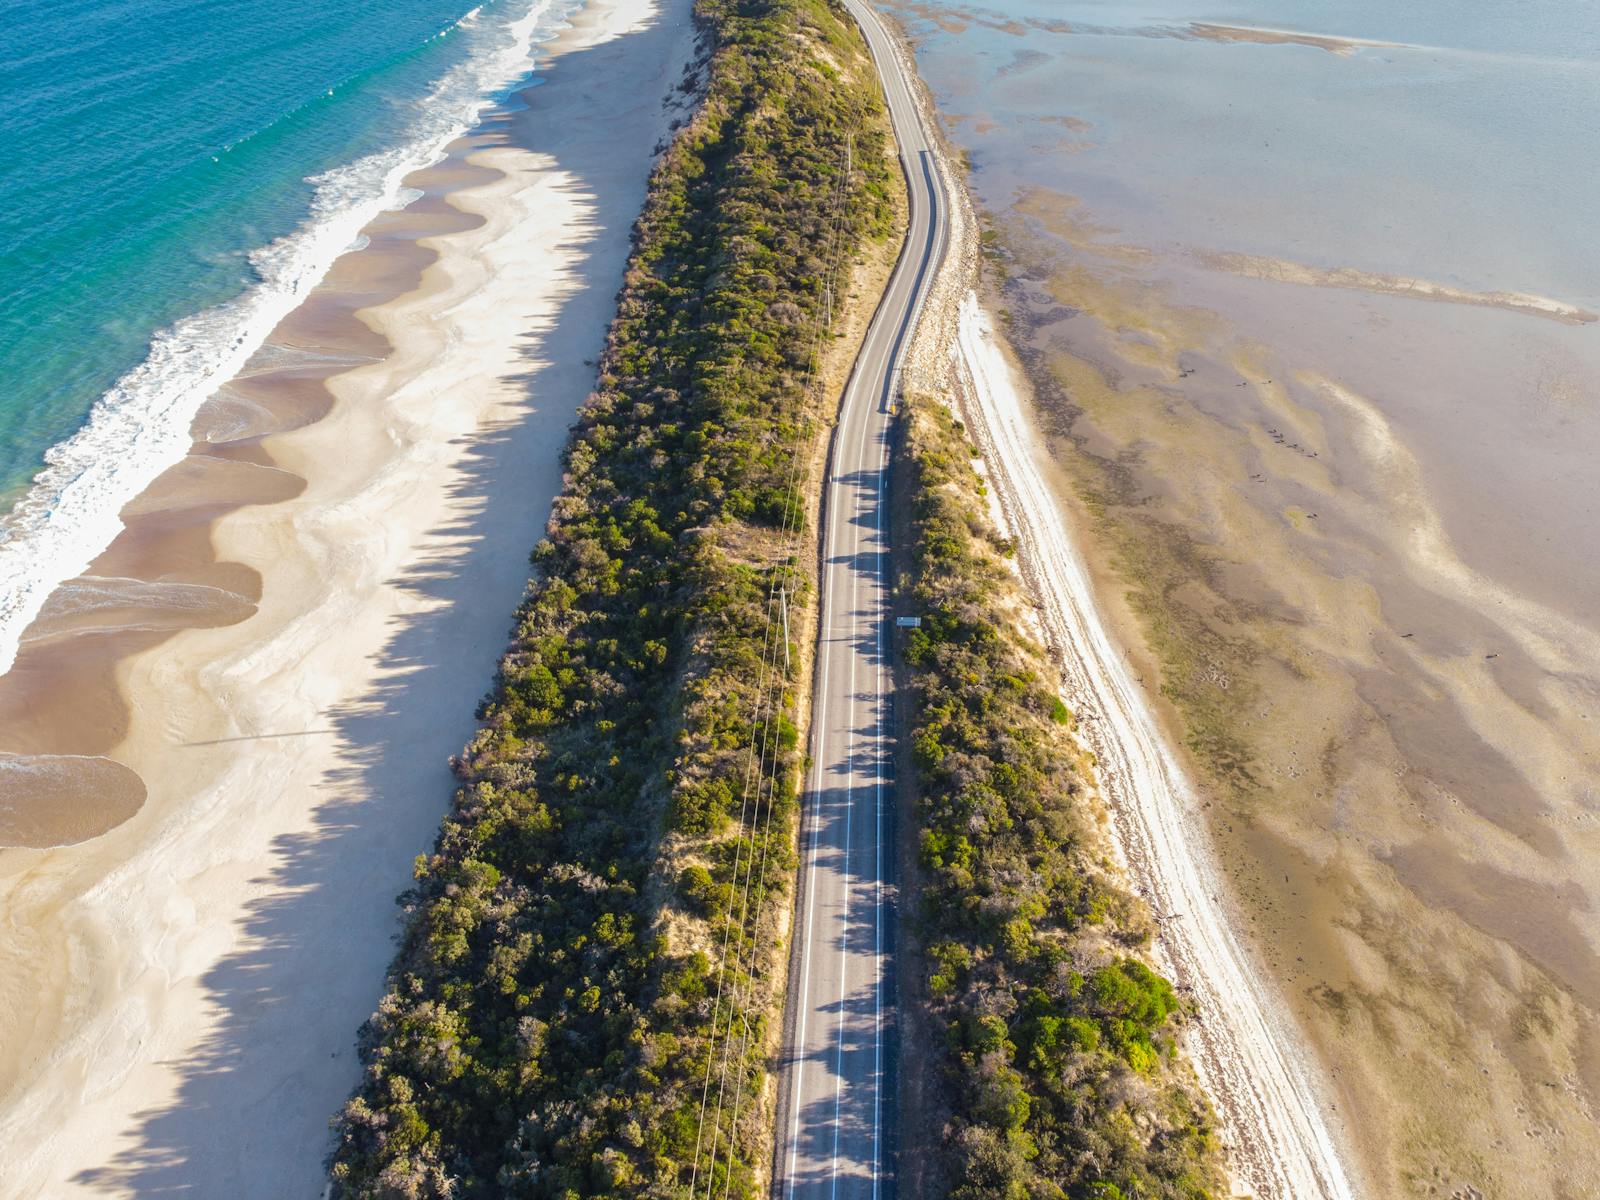 A sun-drenched road flanked on either side by white sandy beaches